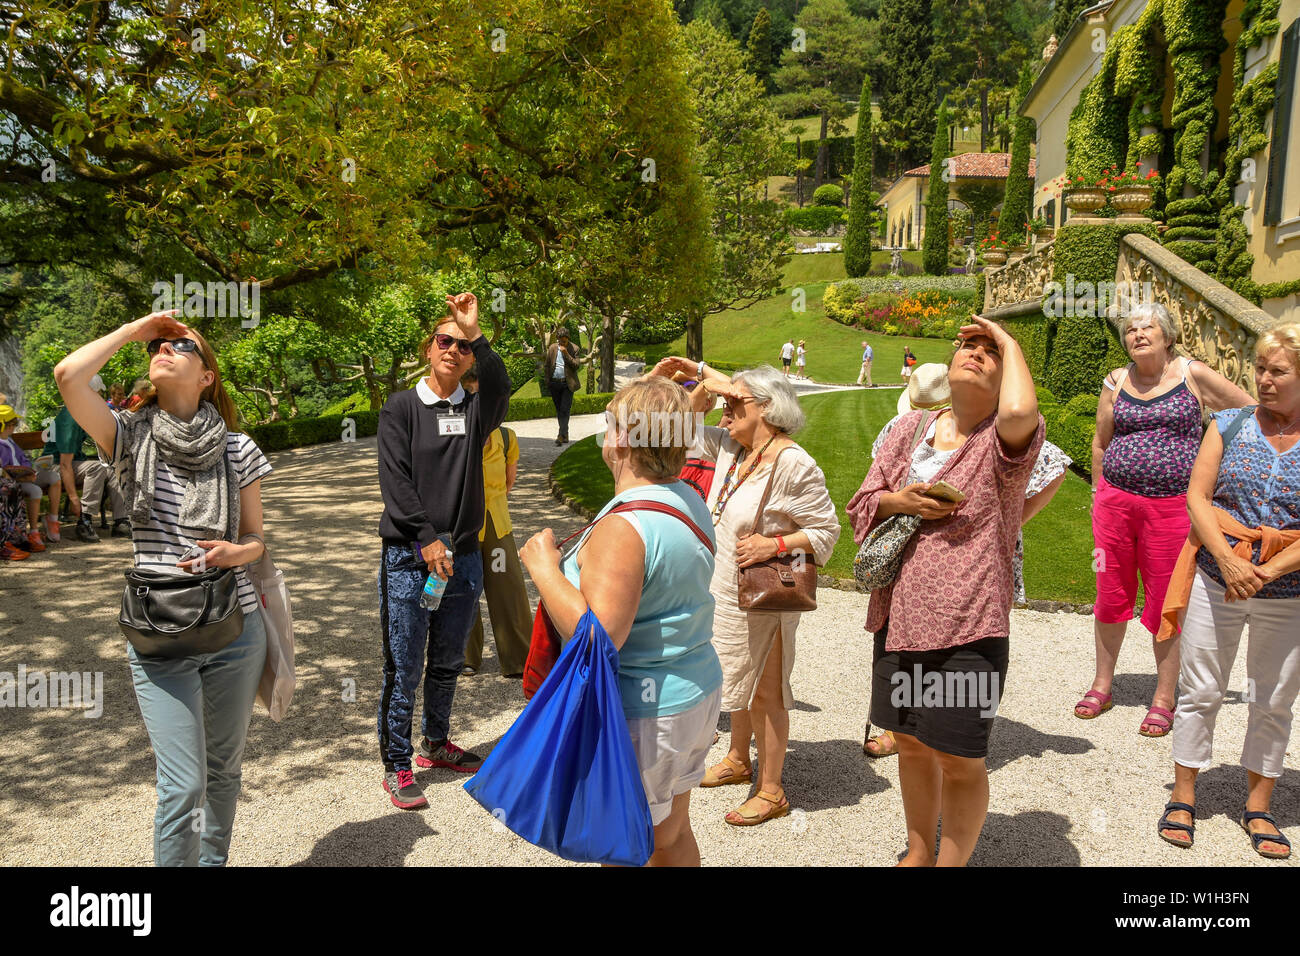 LENNO, LAKE COMO, ITALY - JUNE 2019: People in a guided tour party looking at one of the buildings in the grounds of the Villa Balbianello in Lenno on Stock Photo